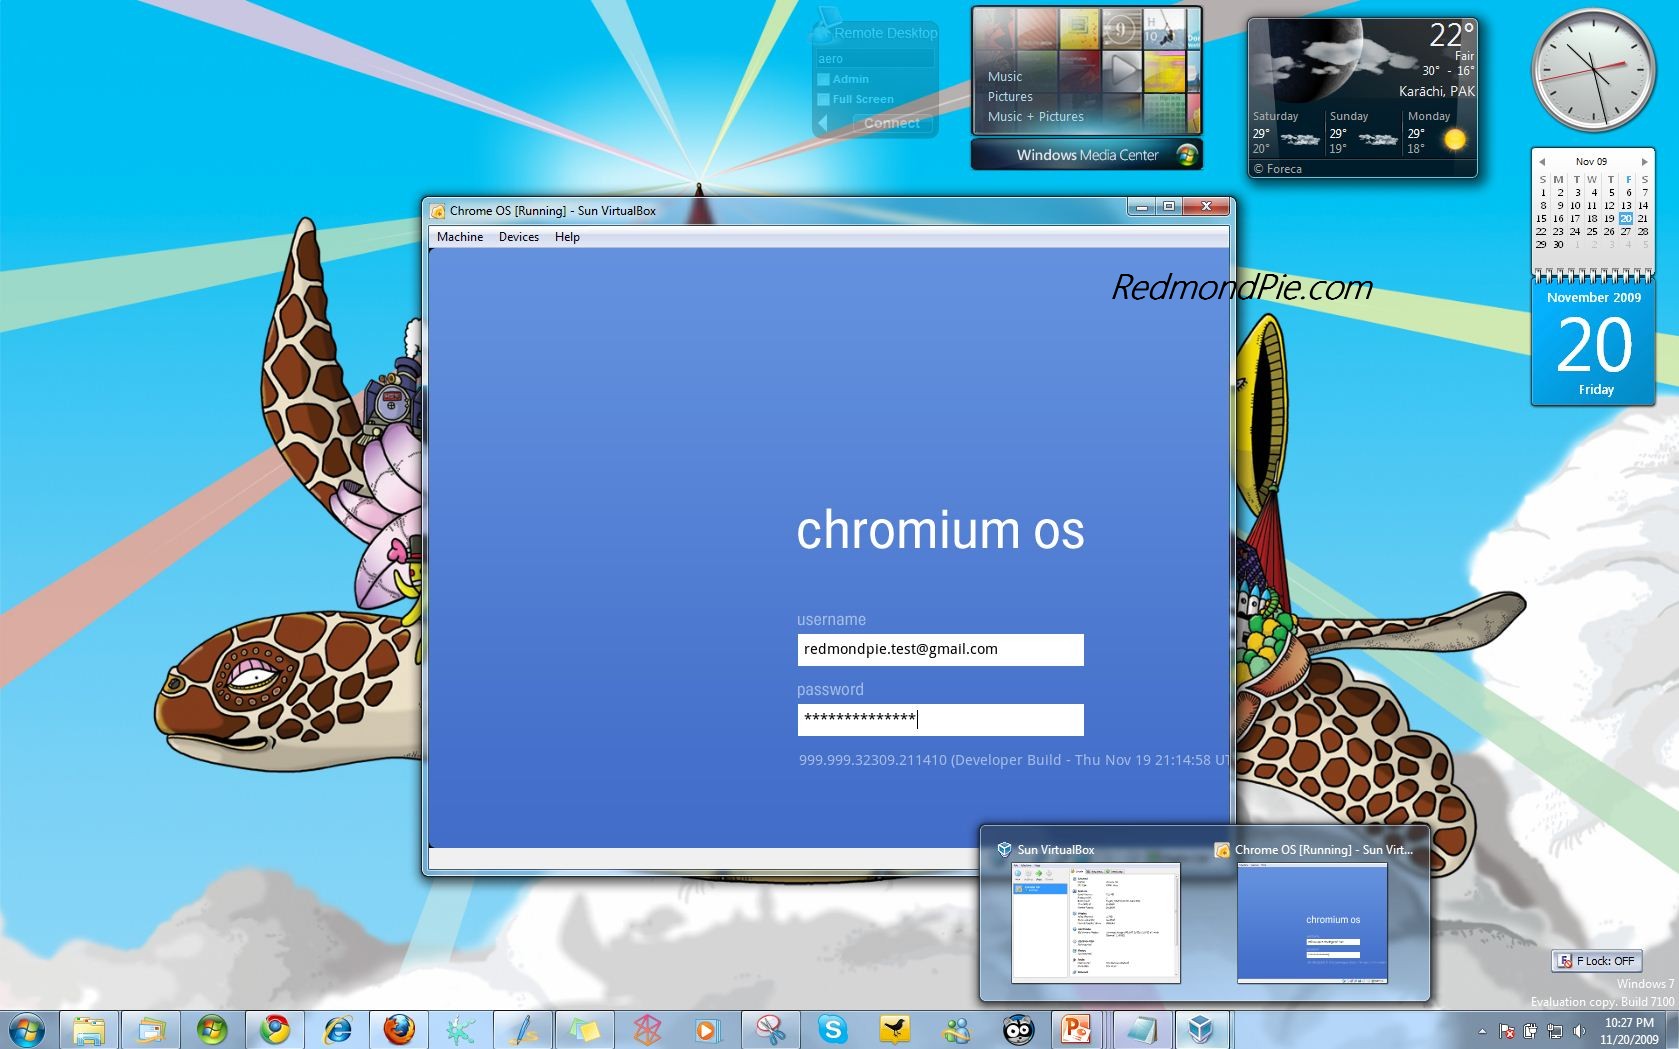 Chrome OS VM running under Windows 7. Click here to see the image in 